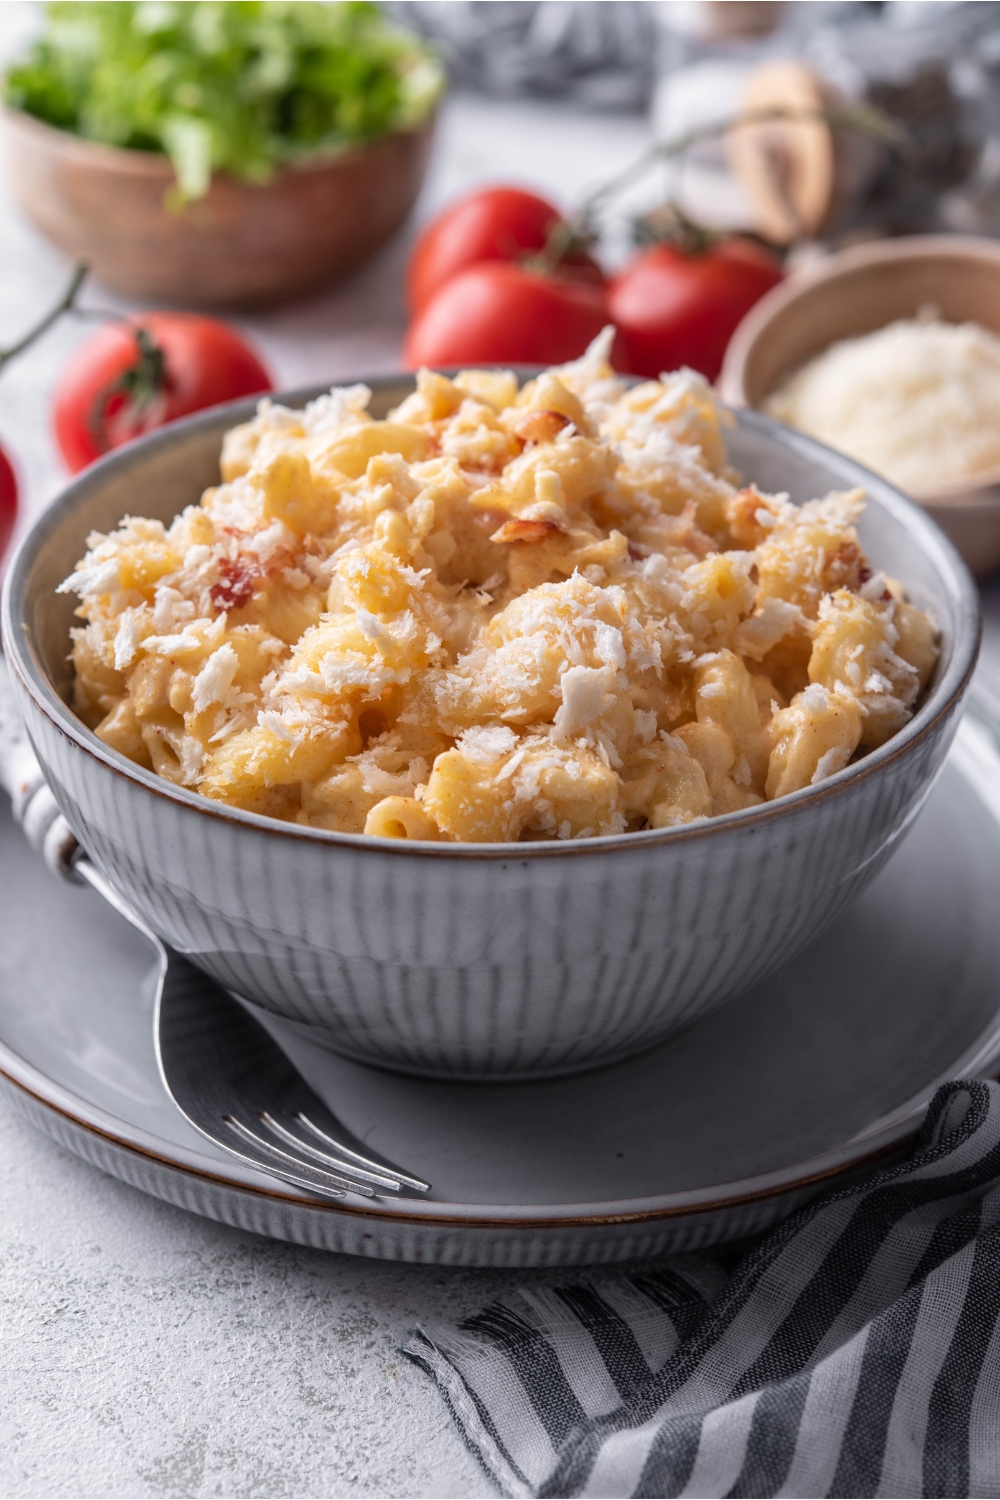 A bowl of mac and cheese with crumbled bacon and bread crumbs on top. The mac and cheese is in a blue bowl atop a blue plate with a fork on it.